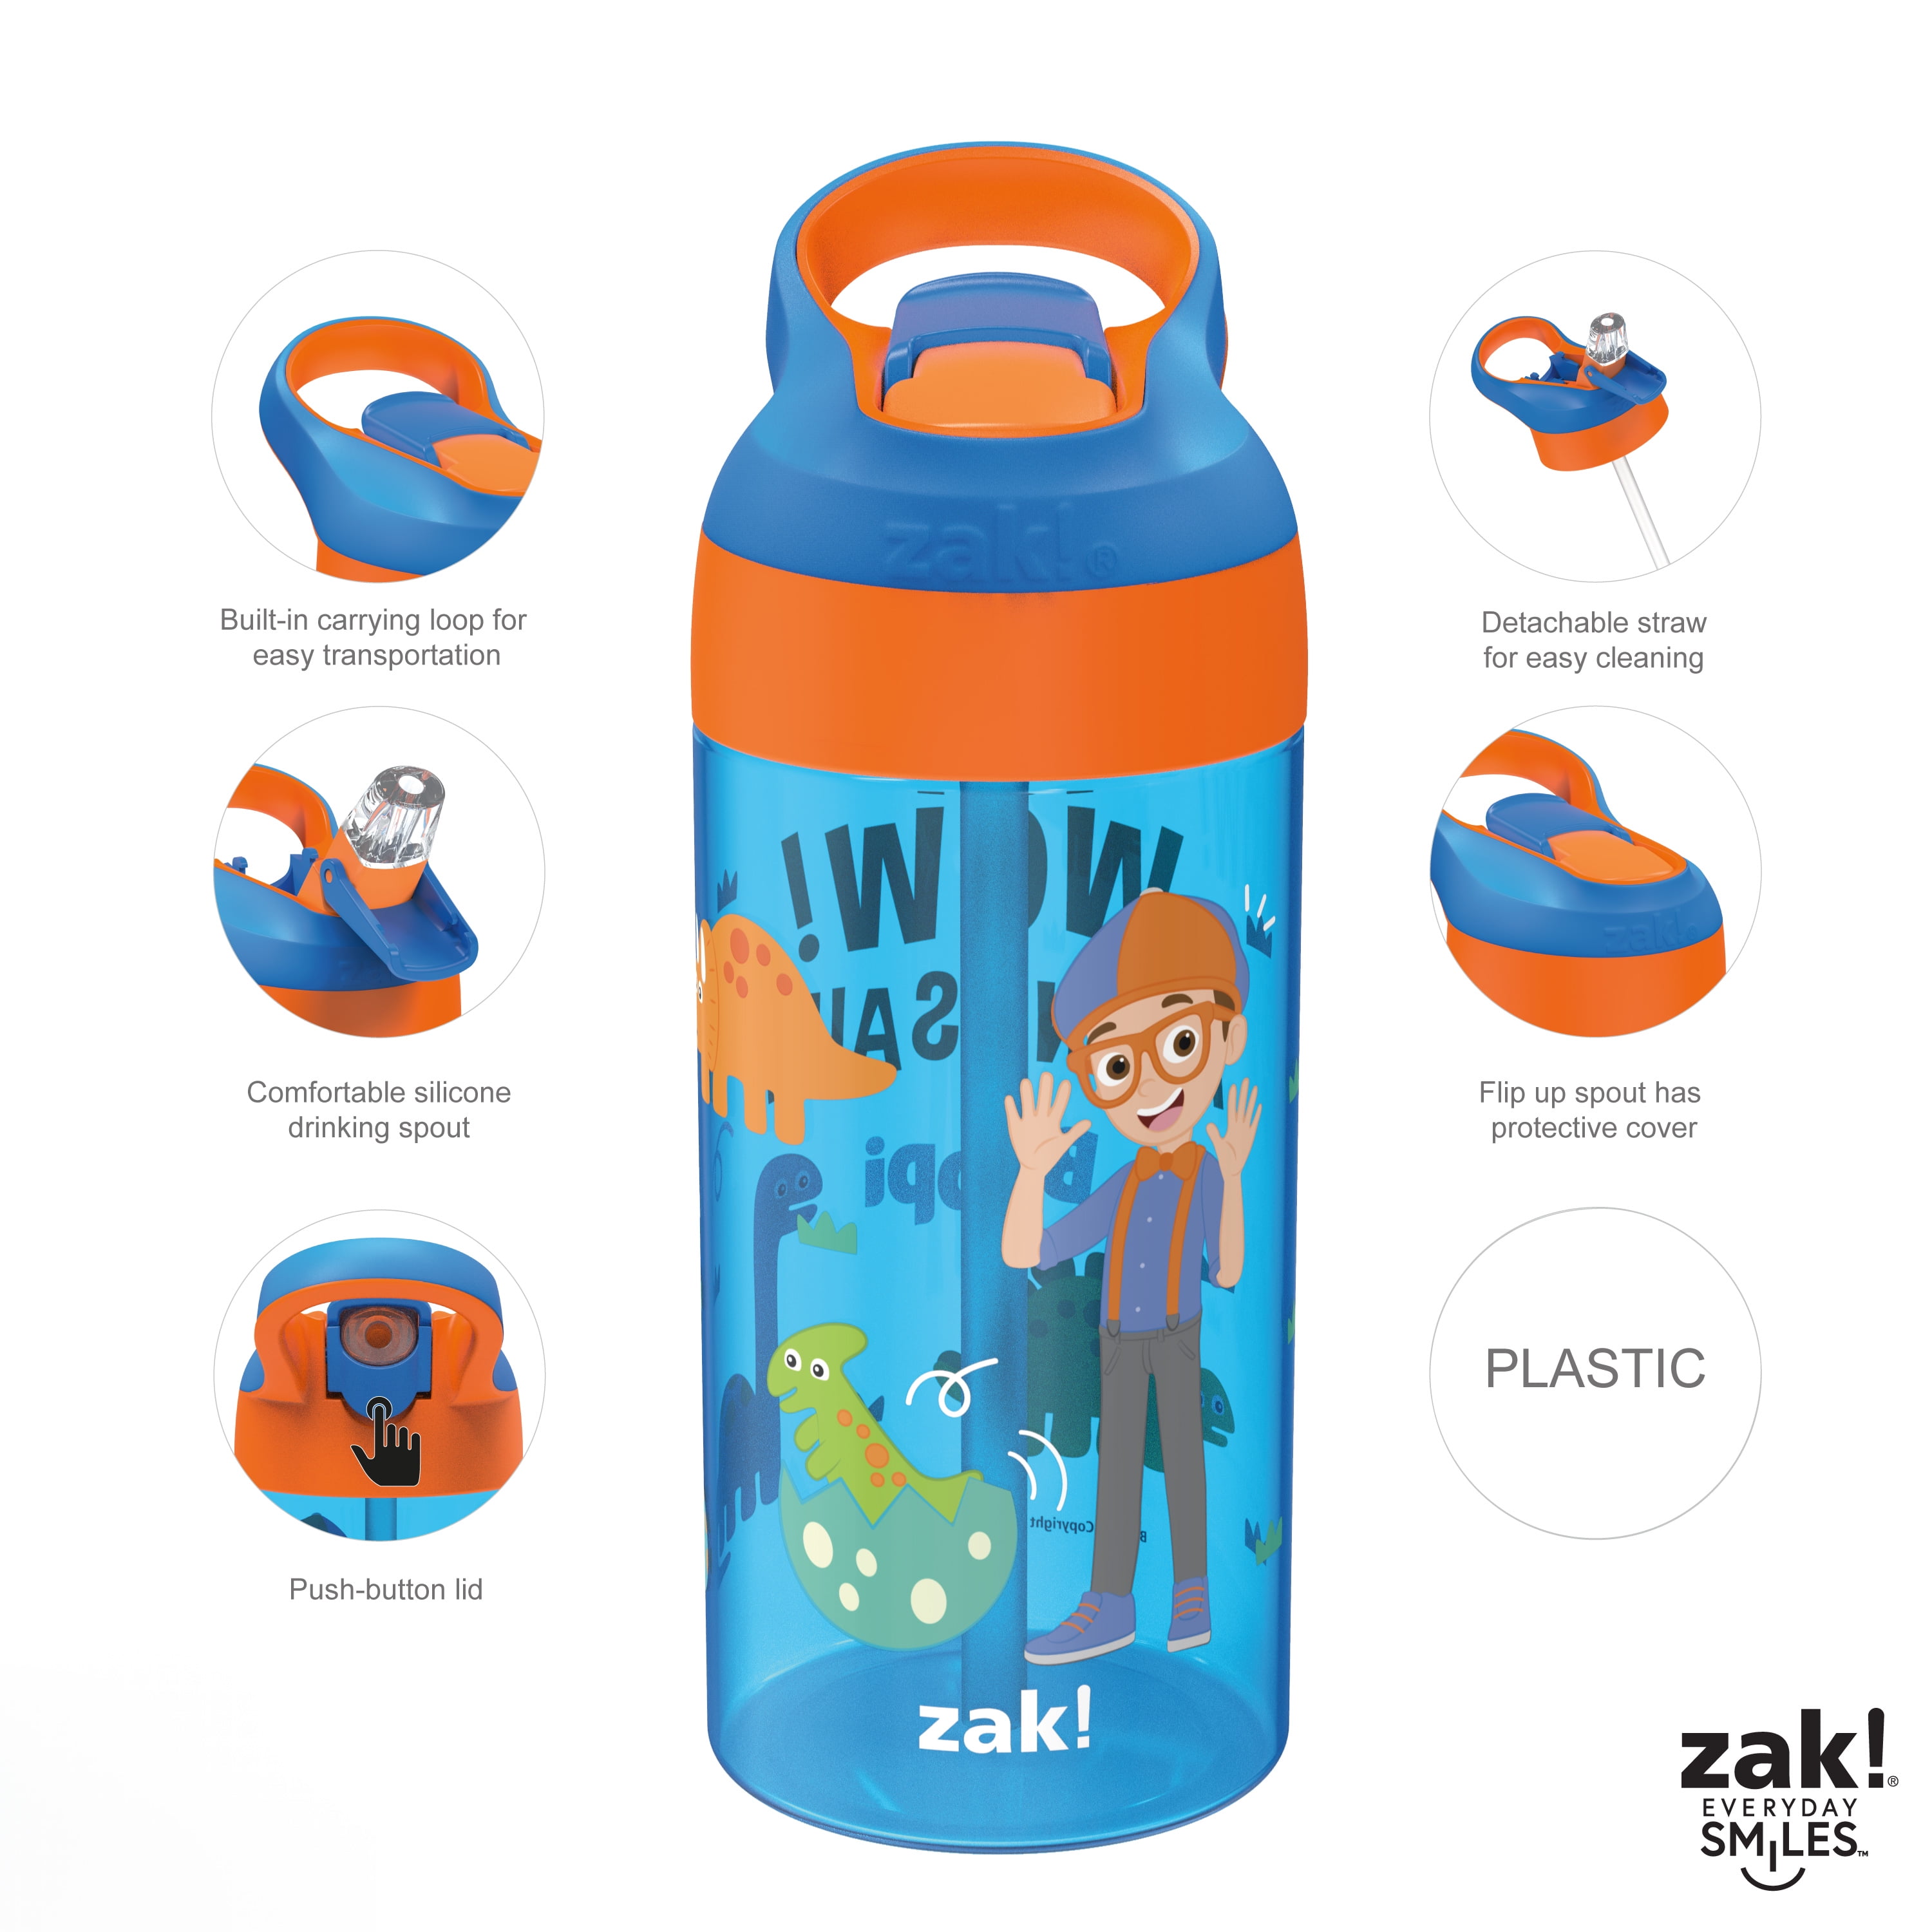 Zak Designs 14oz Stainless Steel Kids' Water Bottle with Antimicrobial Spout 'Blippi